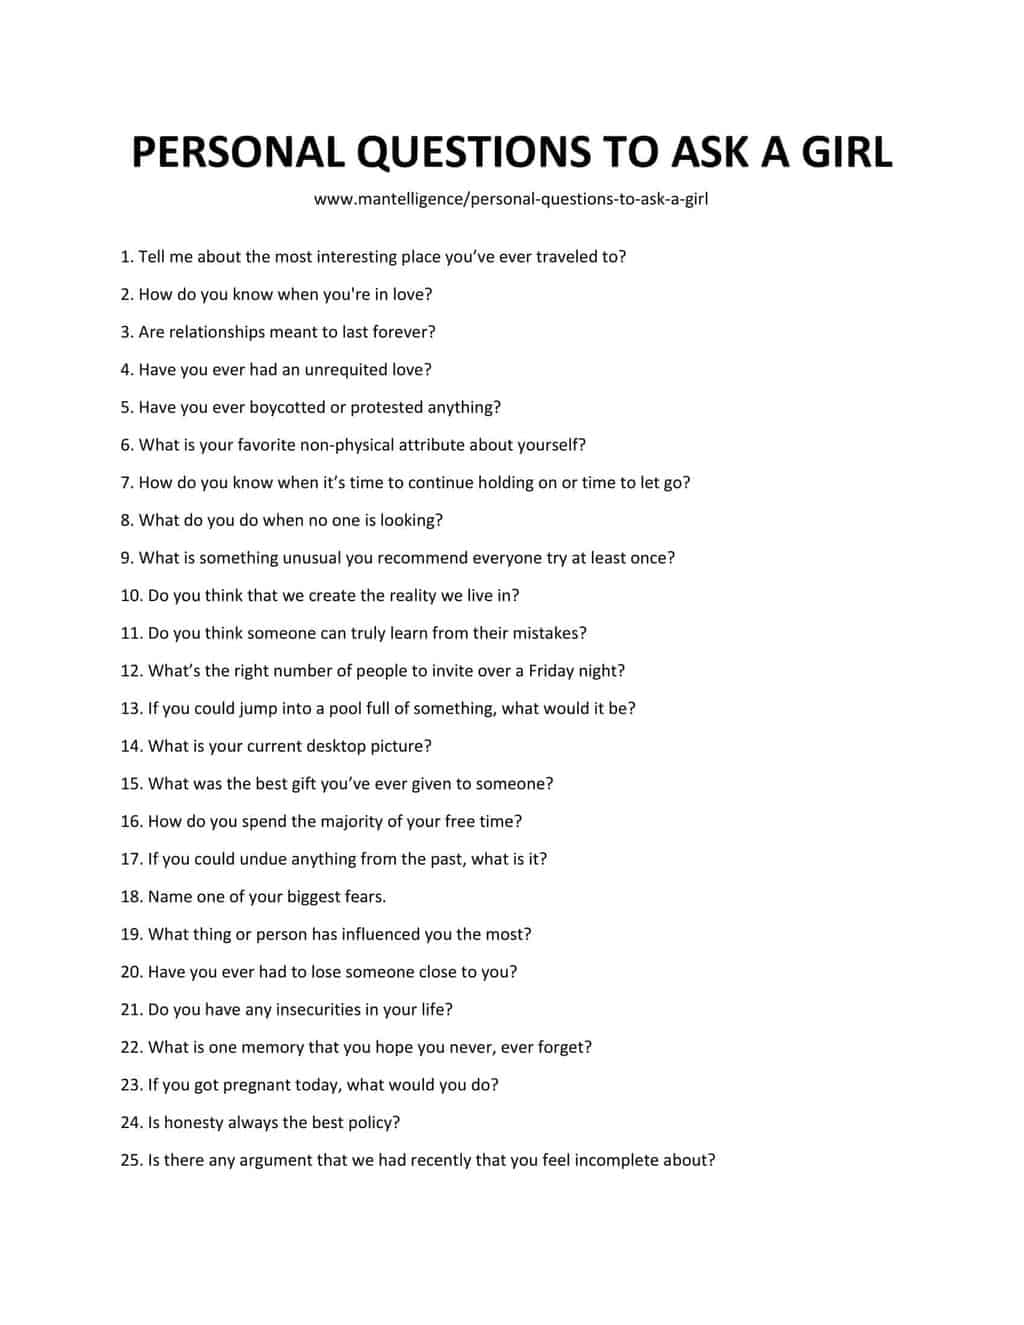 Get to know you questions for girls